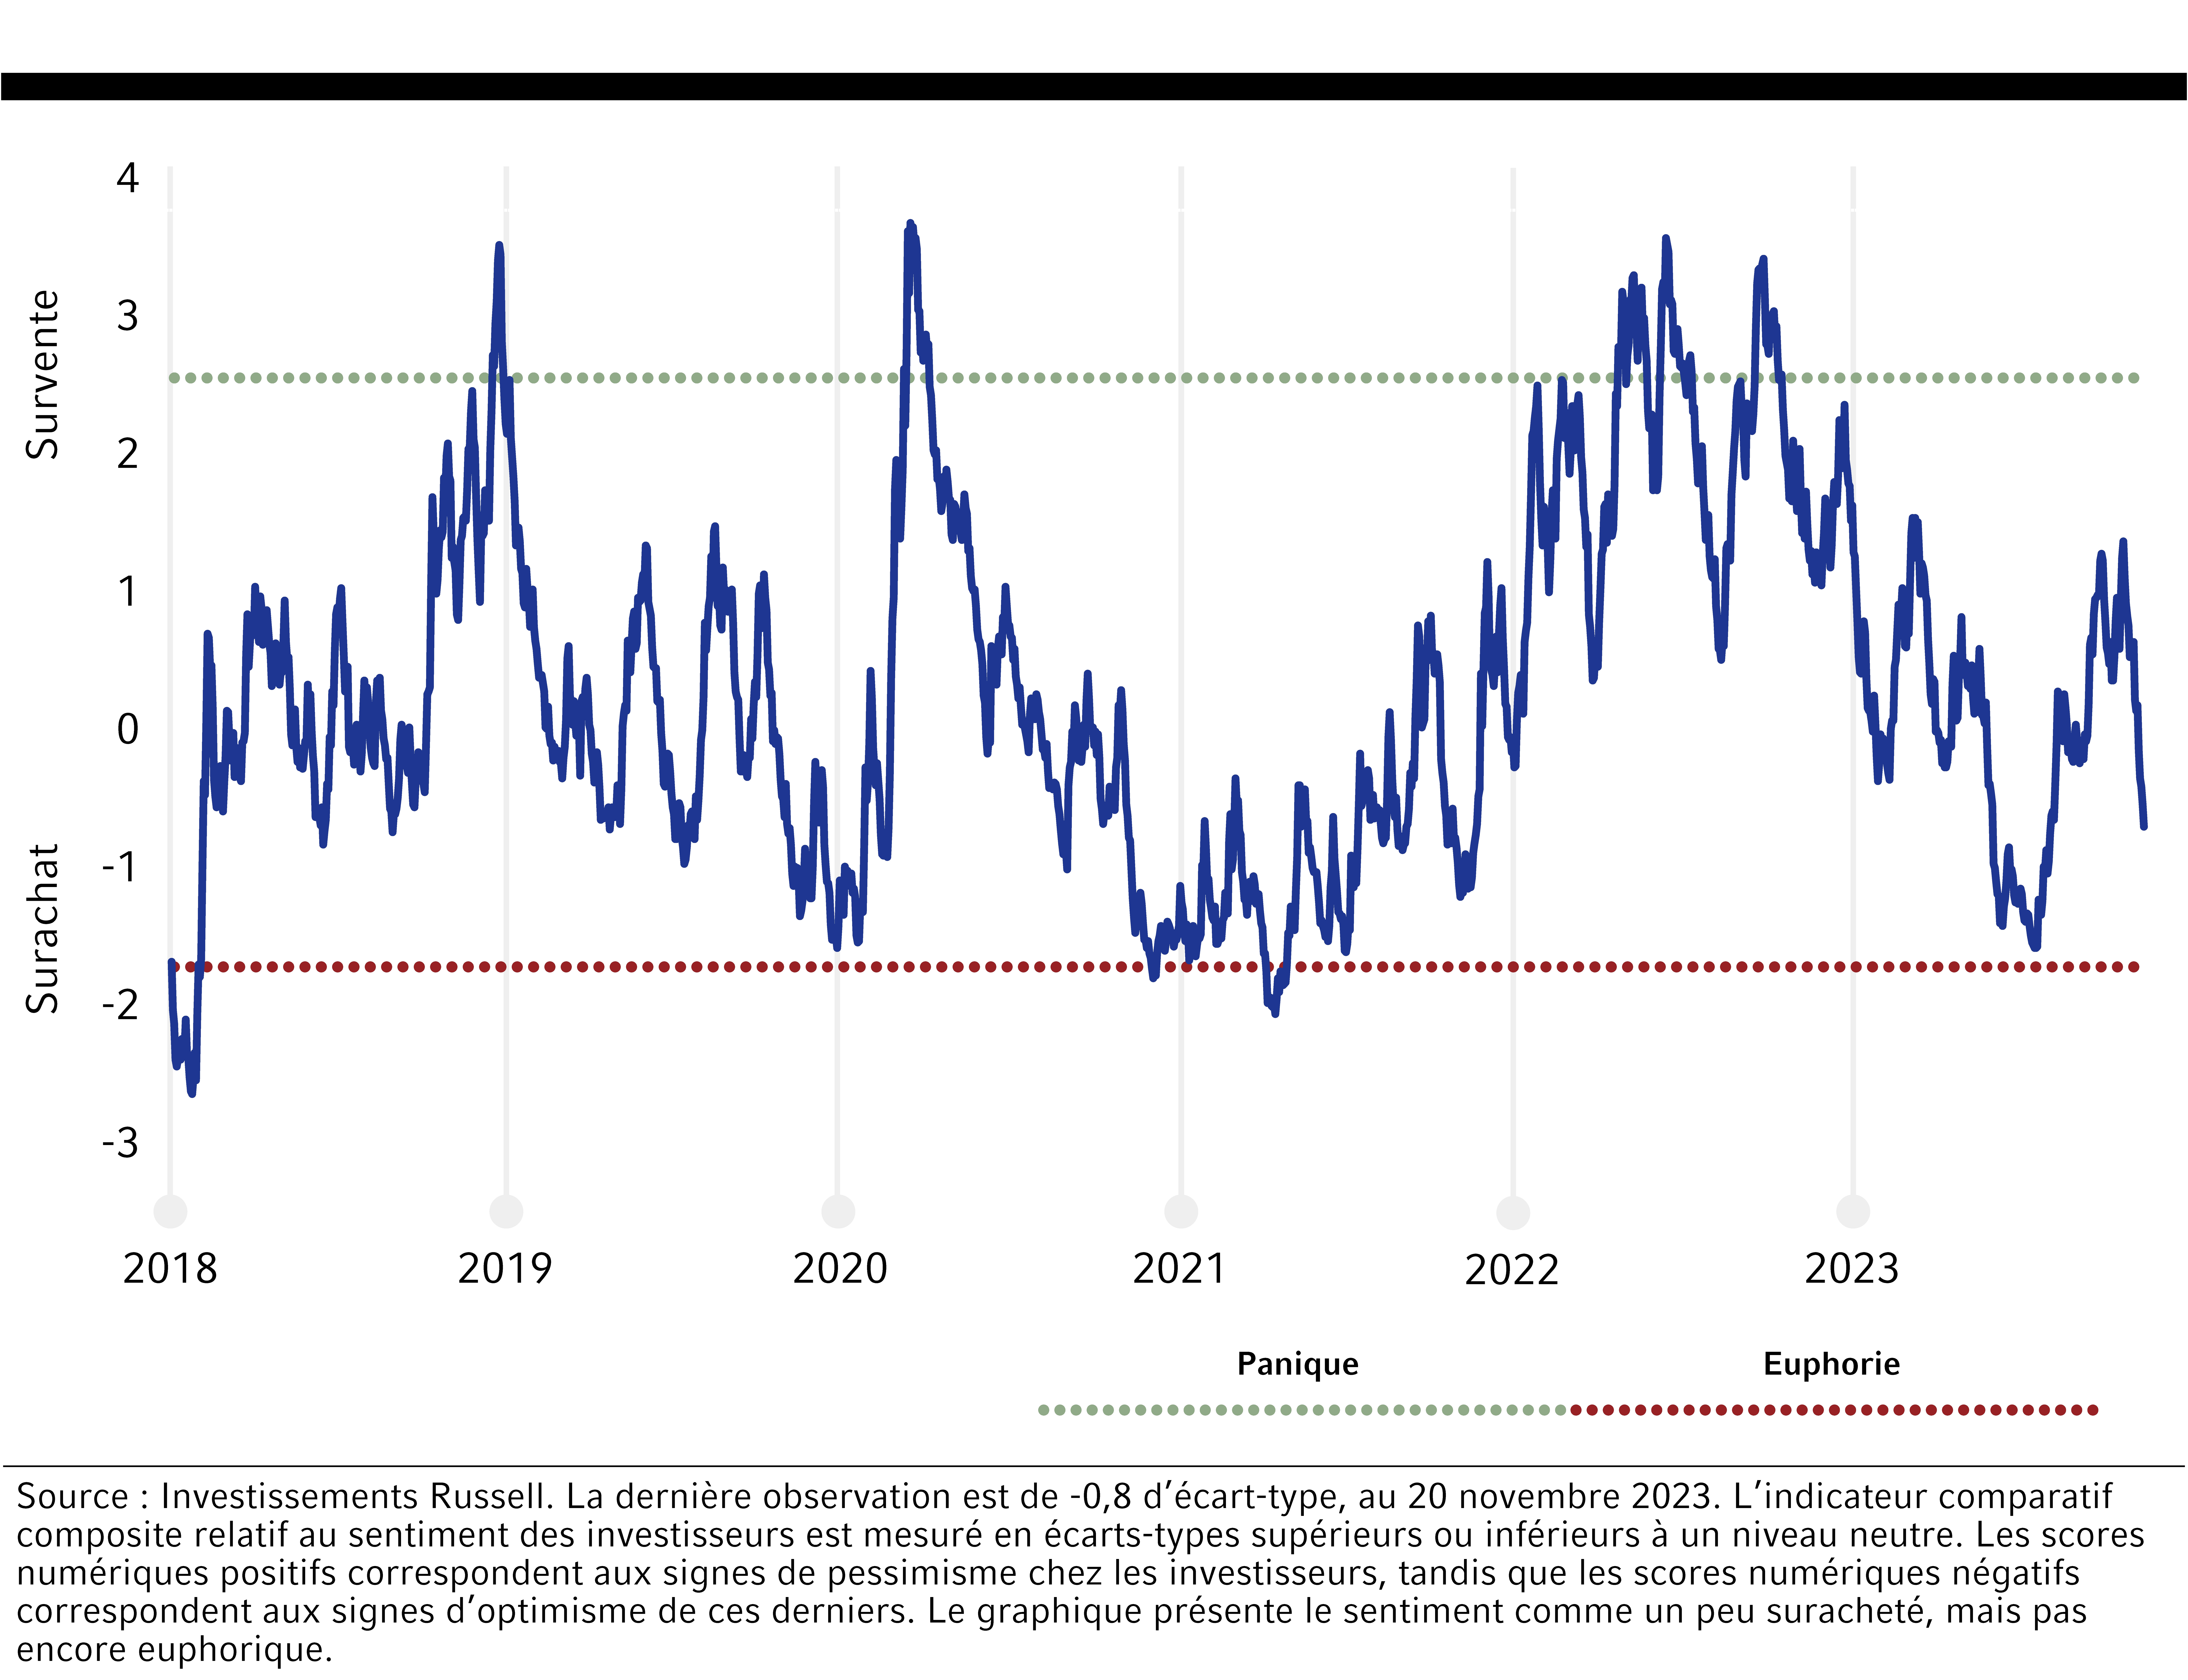 Composite contrarian indicator: Investor sentiment is somewhat overbought, though not yet euphoric